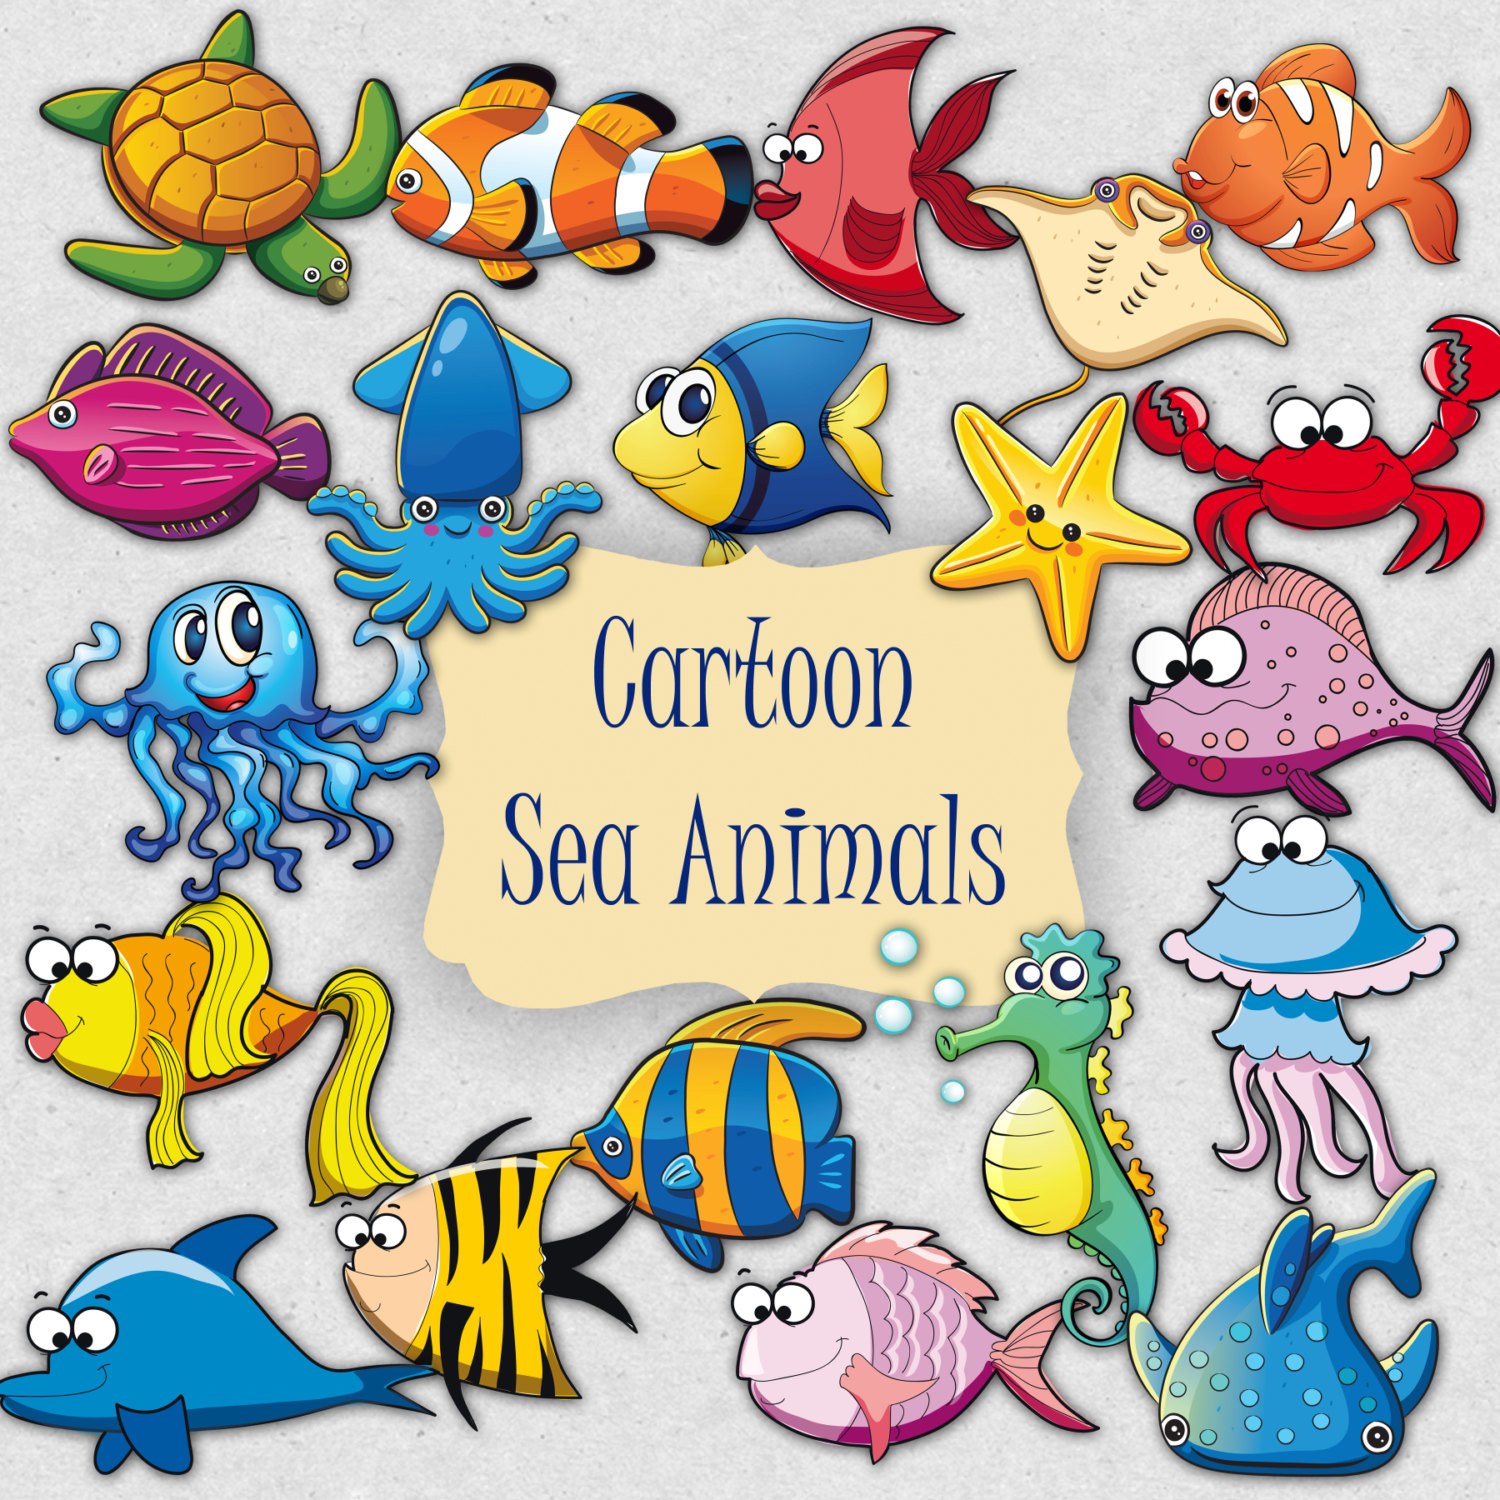 Popular items for sea animals clipart 